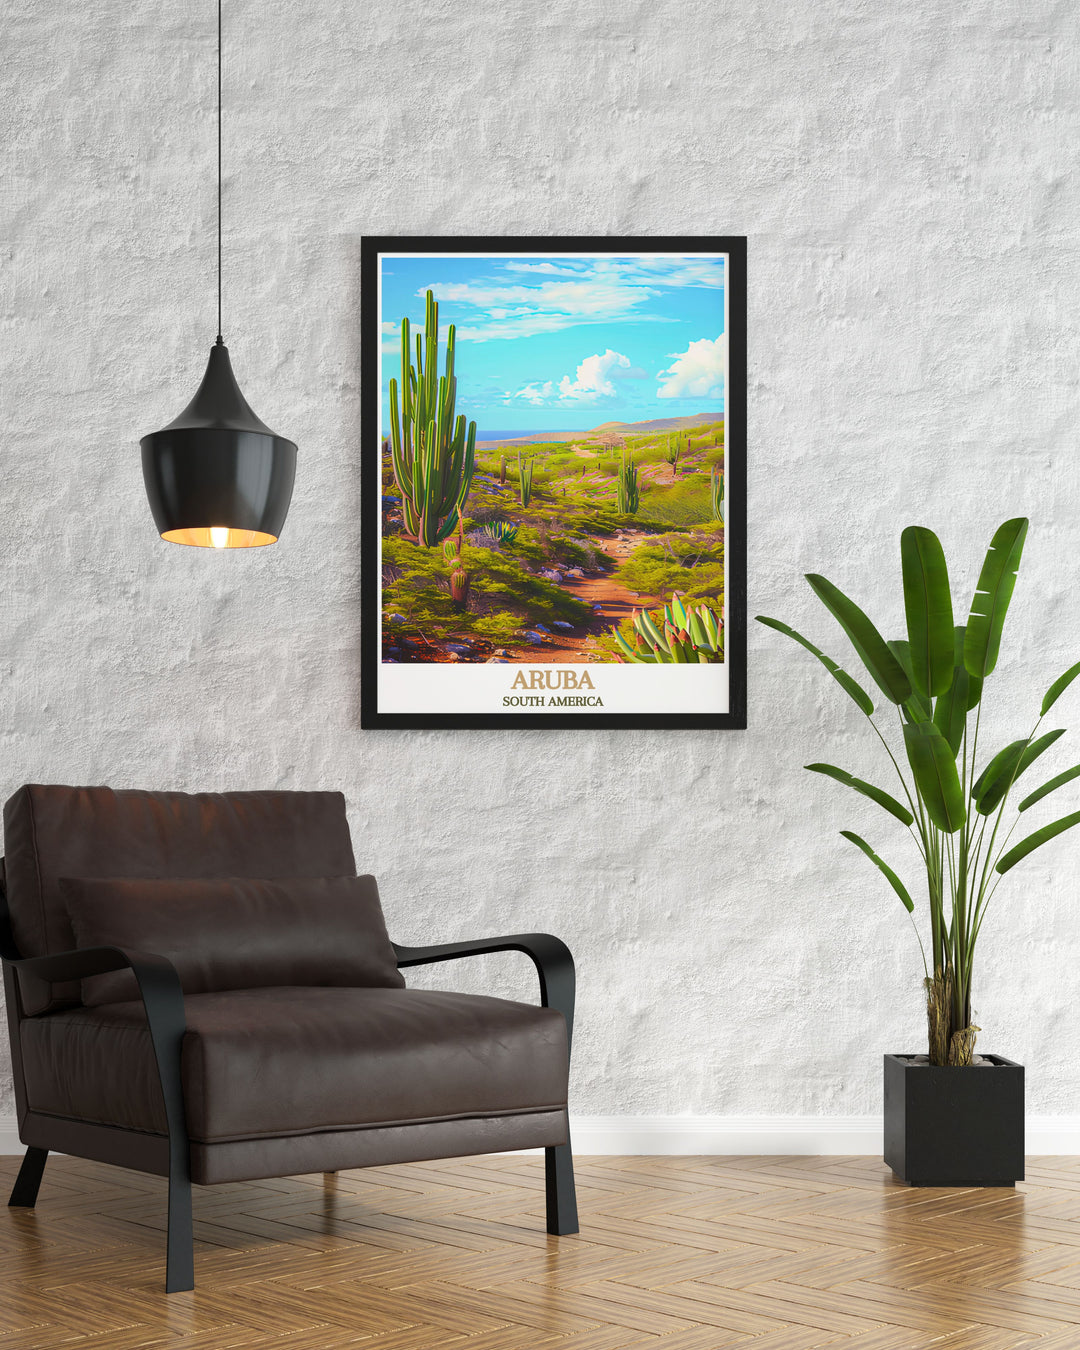 Aruba poster depicting the natural wonders of Arikok National Park bringing the essence of the Caribbean island into your home and serving as a beautiful reminder of your travels or love for nature with its exquisite fine line print quality